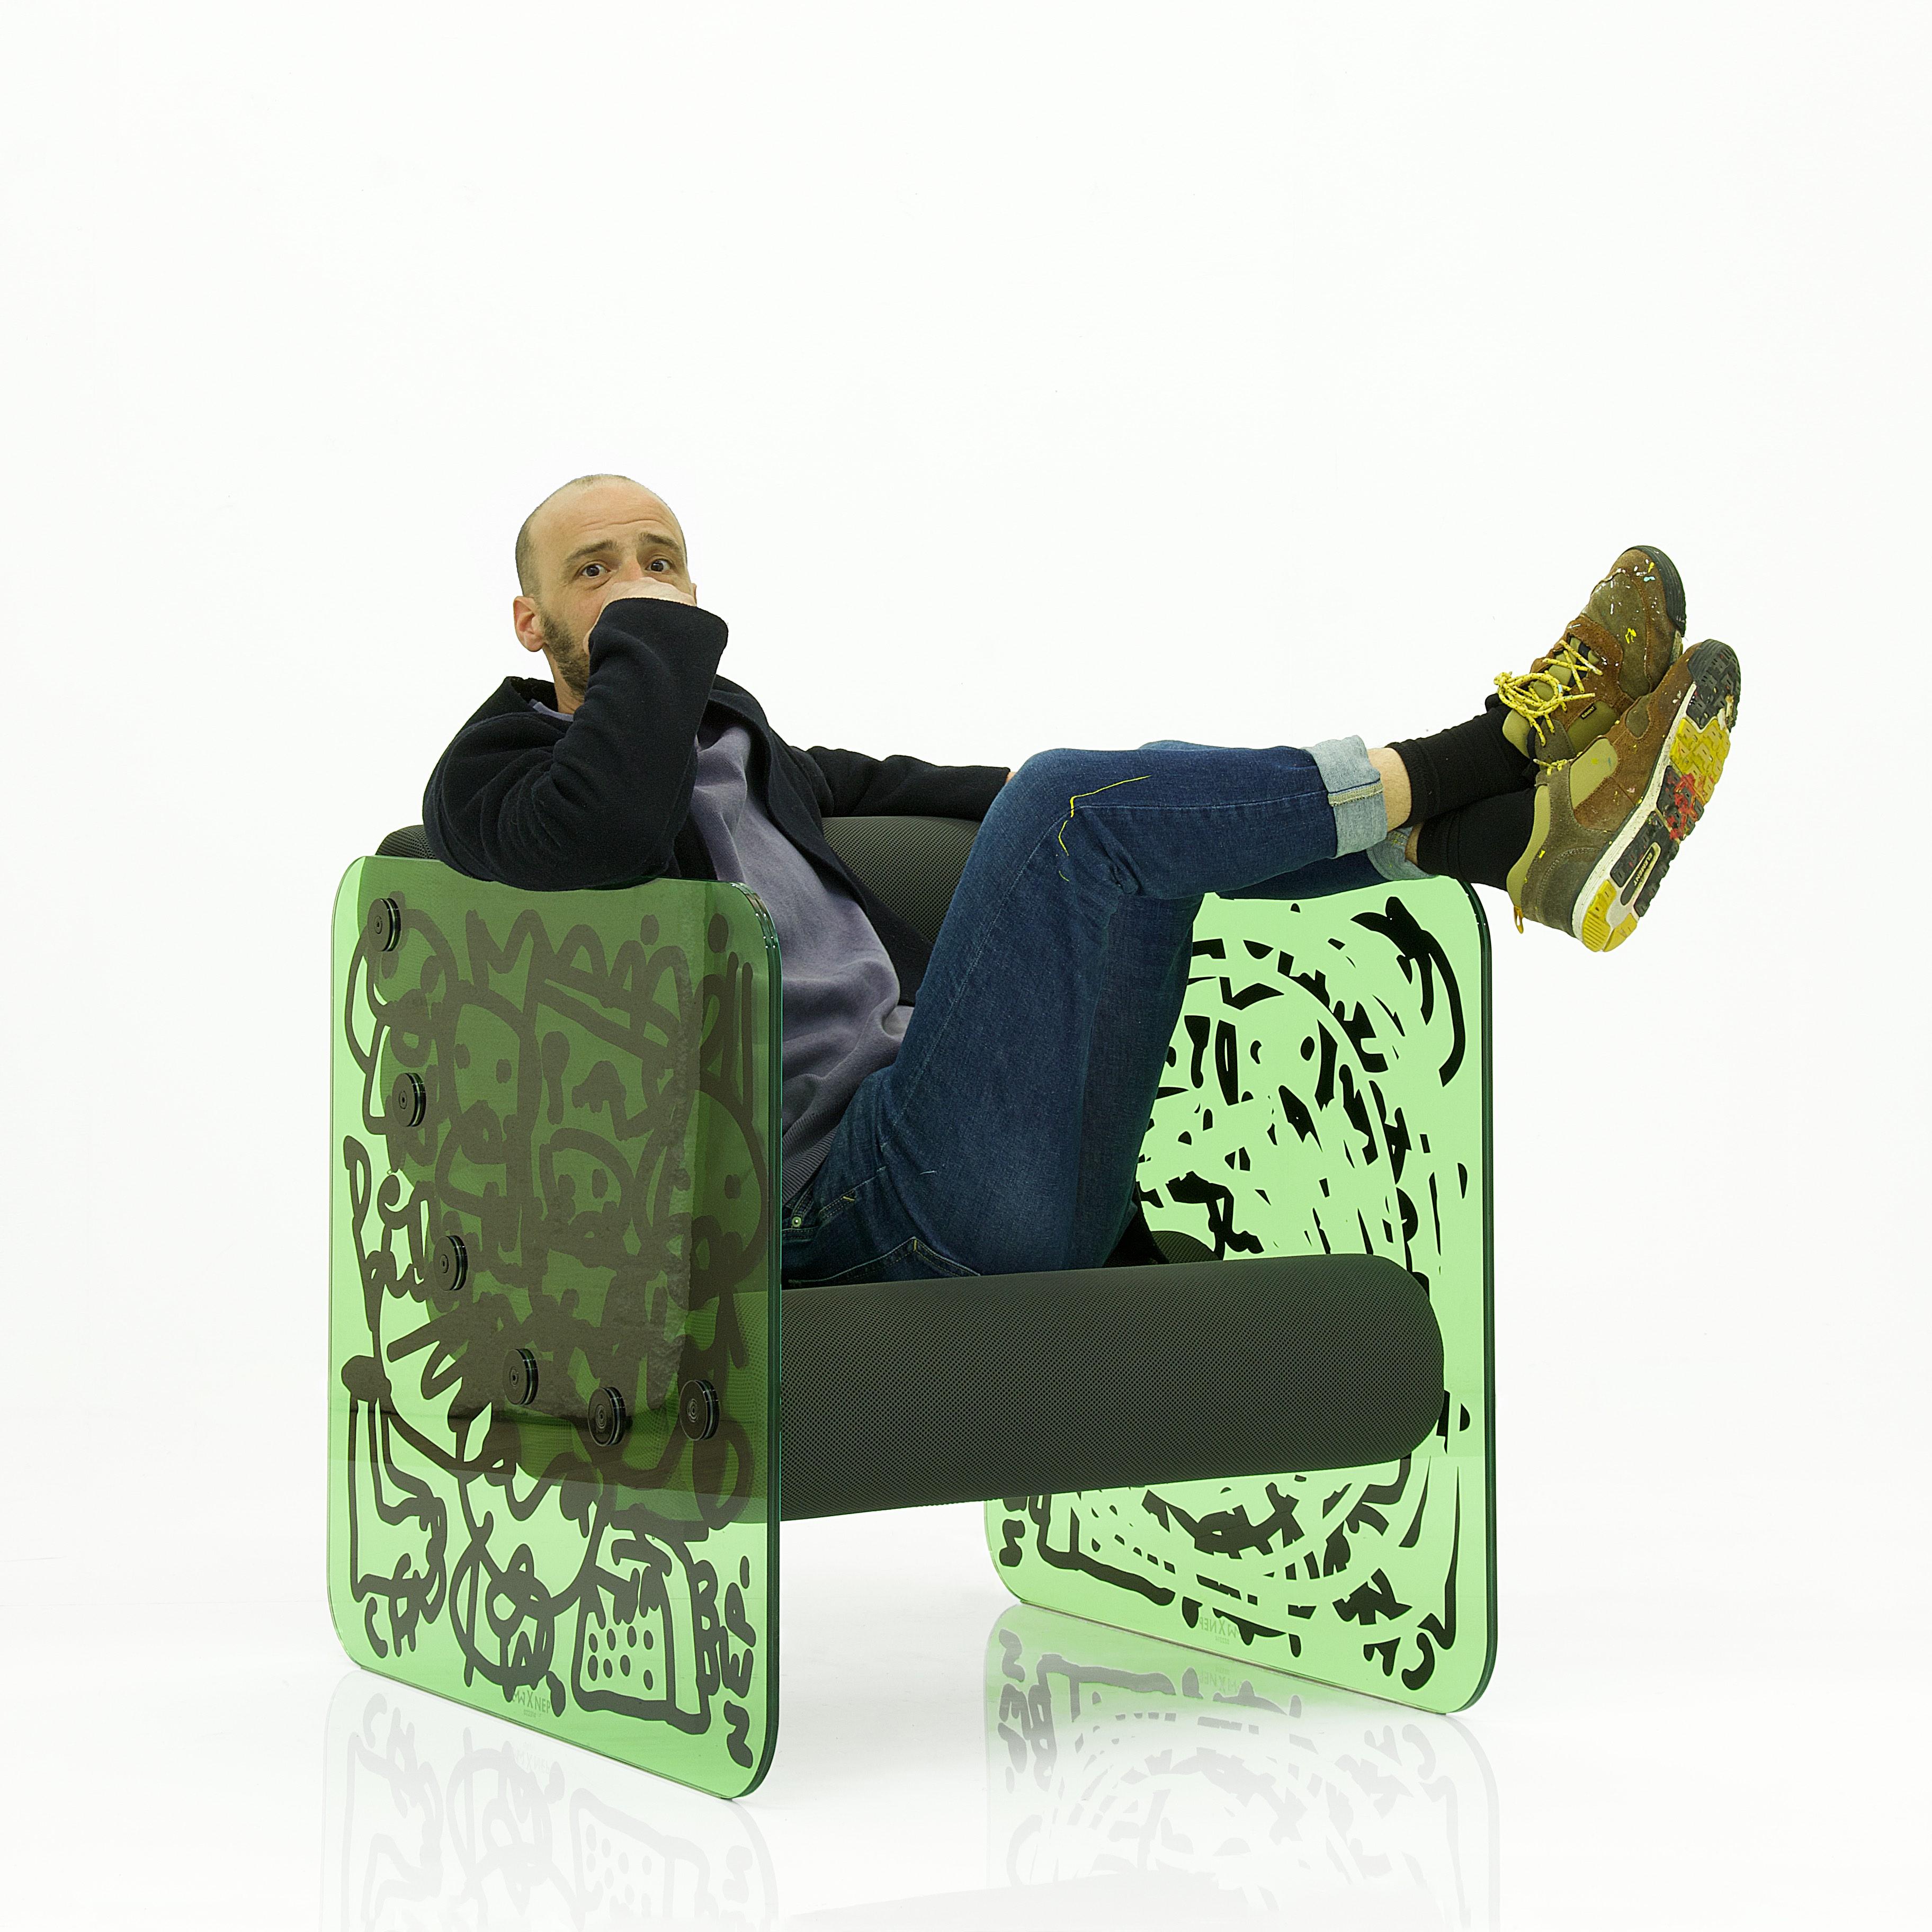 French Mw02 x Nep design armchair, Limited Edition 